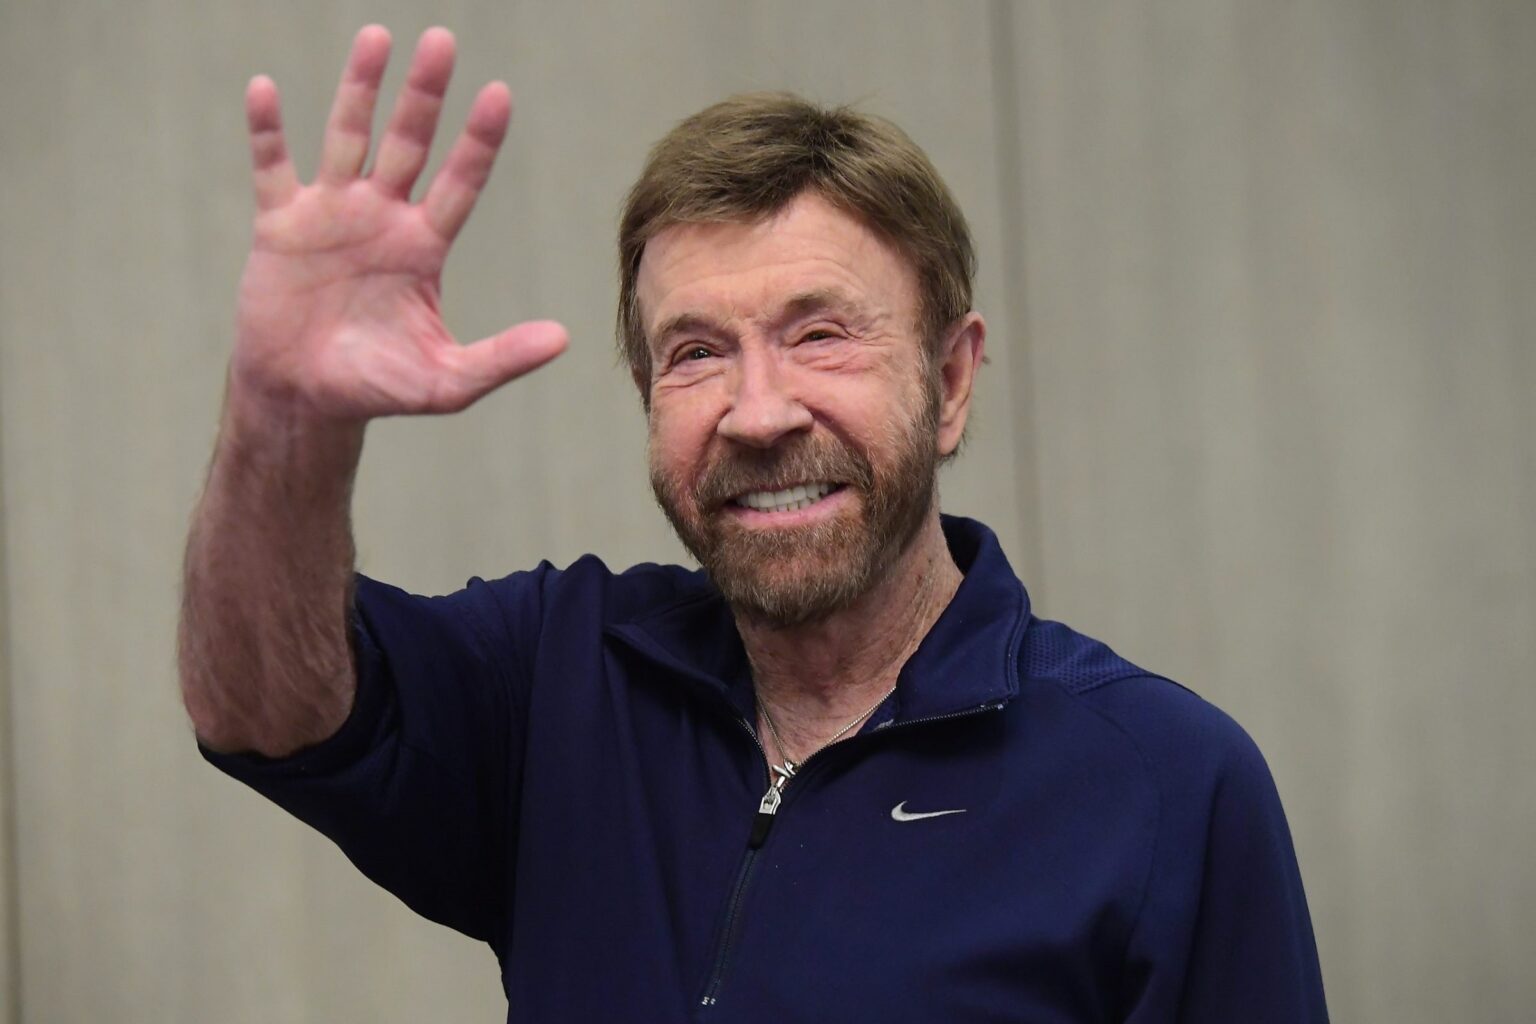 Chuck Norris is turning 81! Let's honor his particular brand of awesomeness by laughing at this collection of classic Chuck Norris jokes!